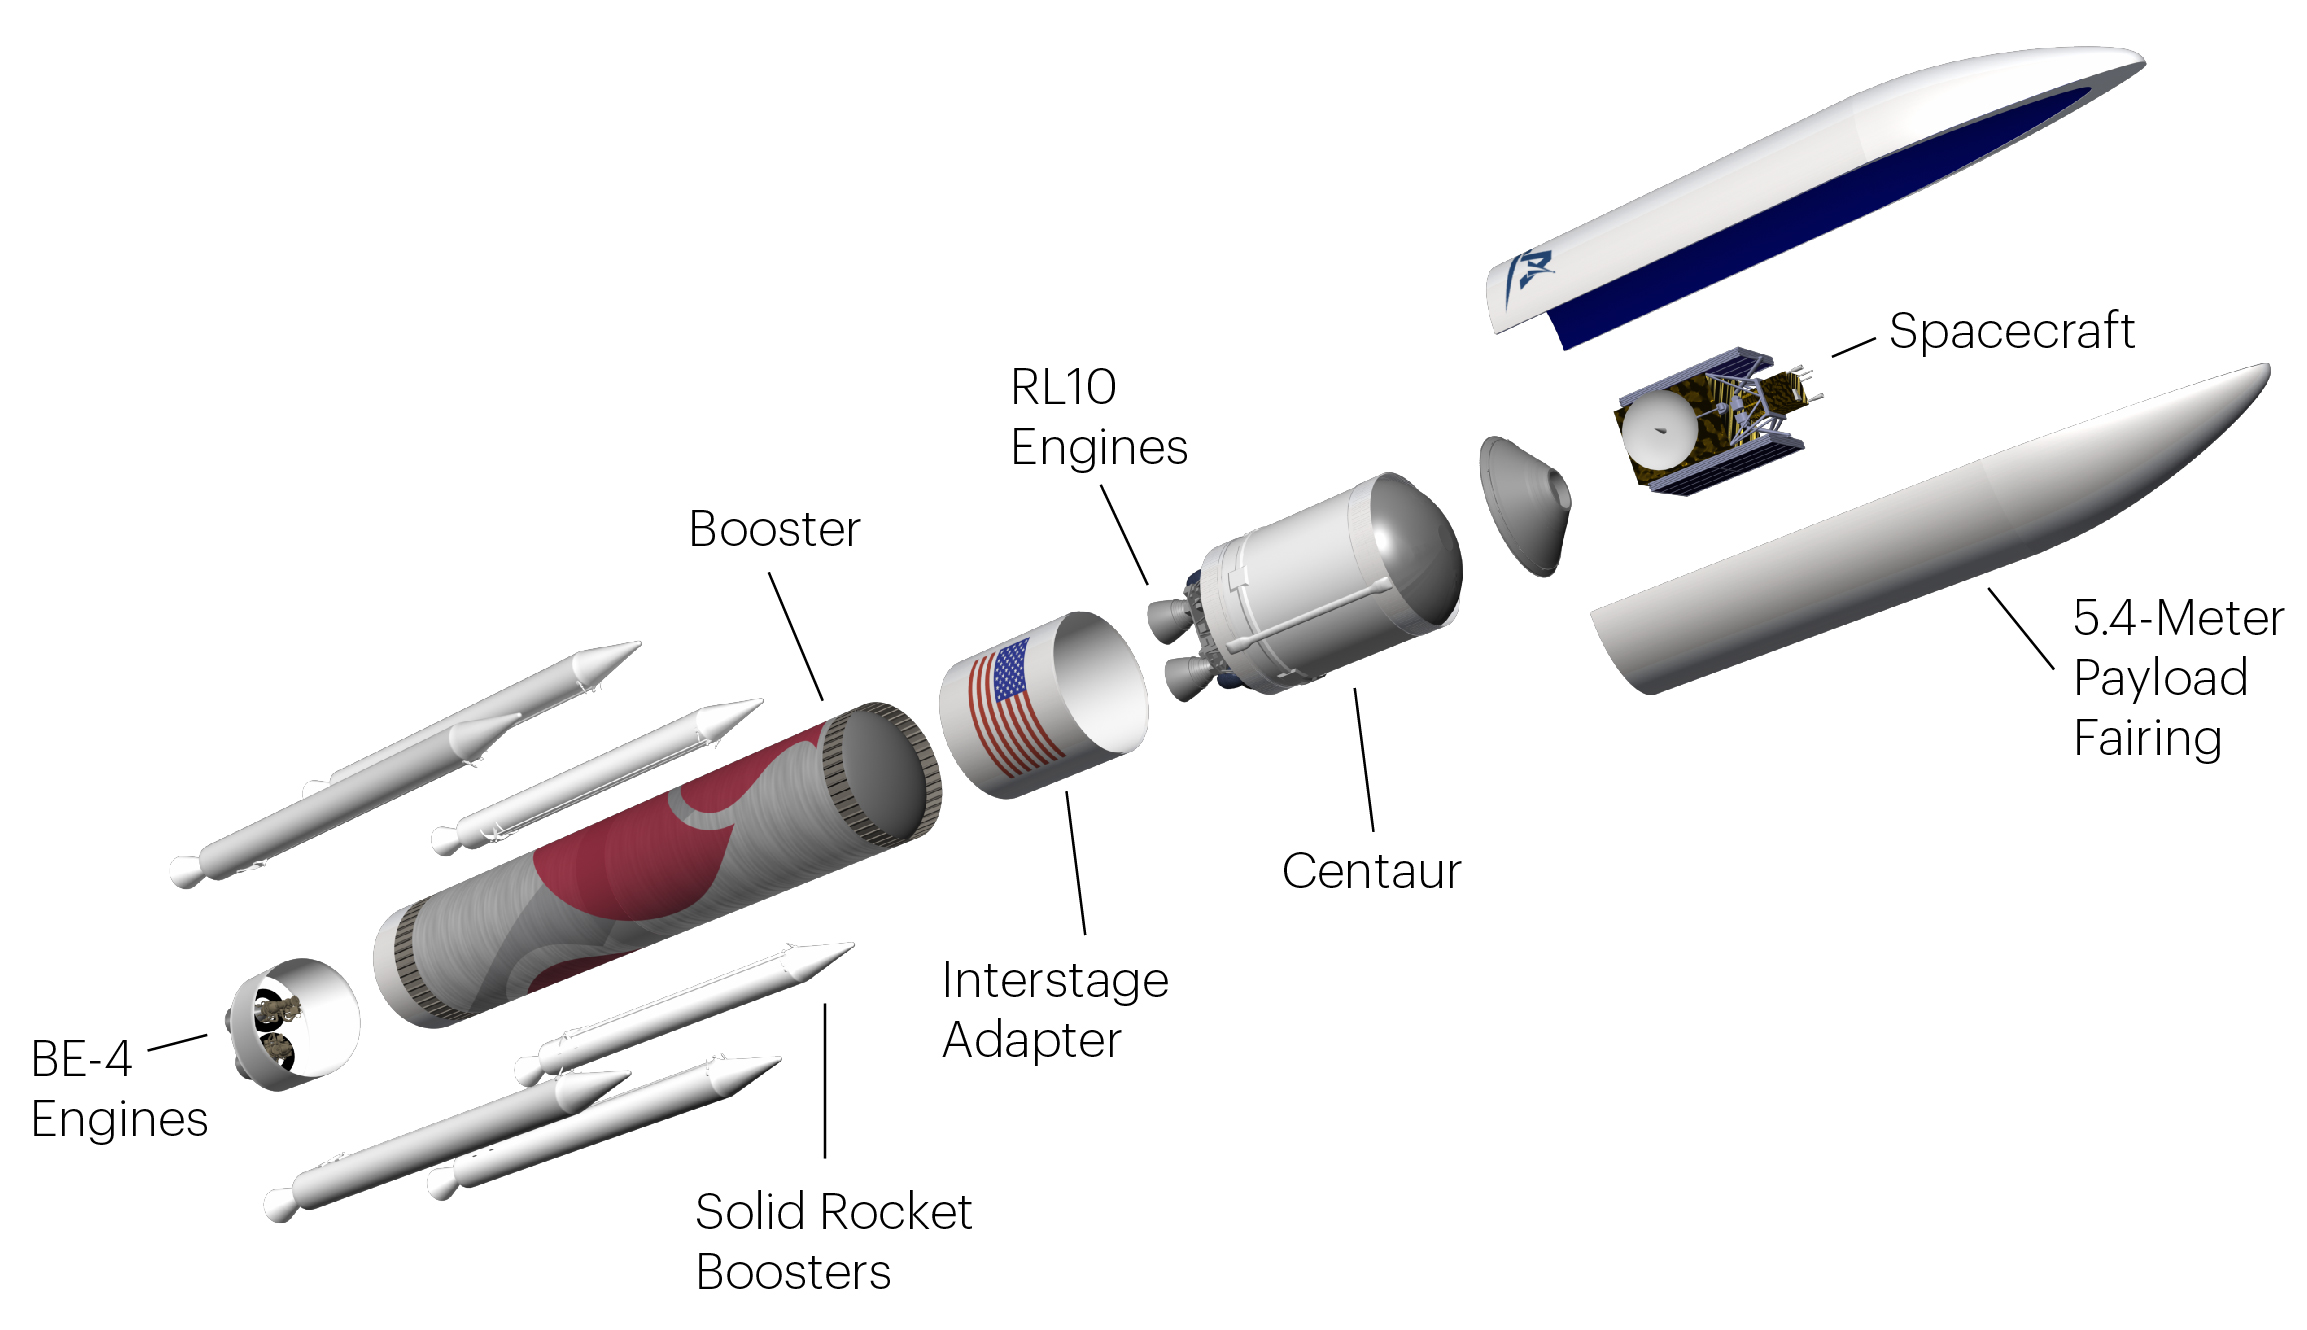 ULA’s Vulcan Upper Stage Needs Mods Before First Launch